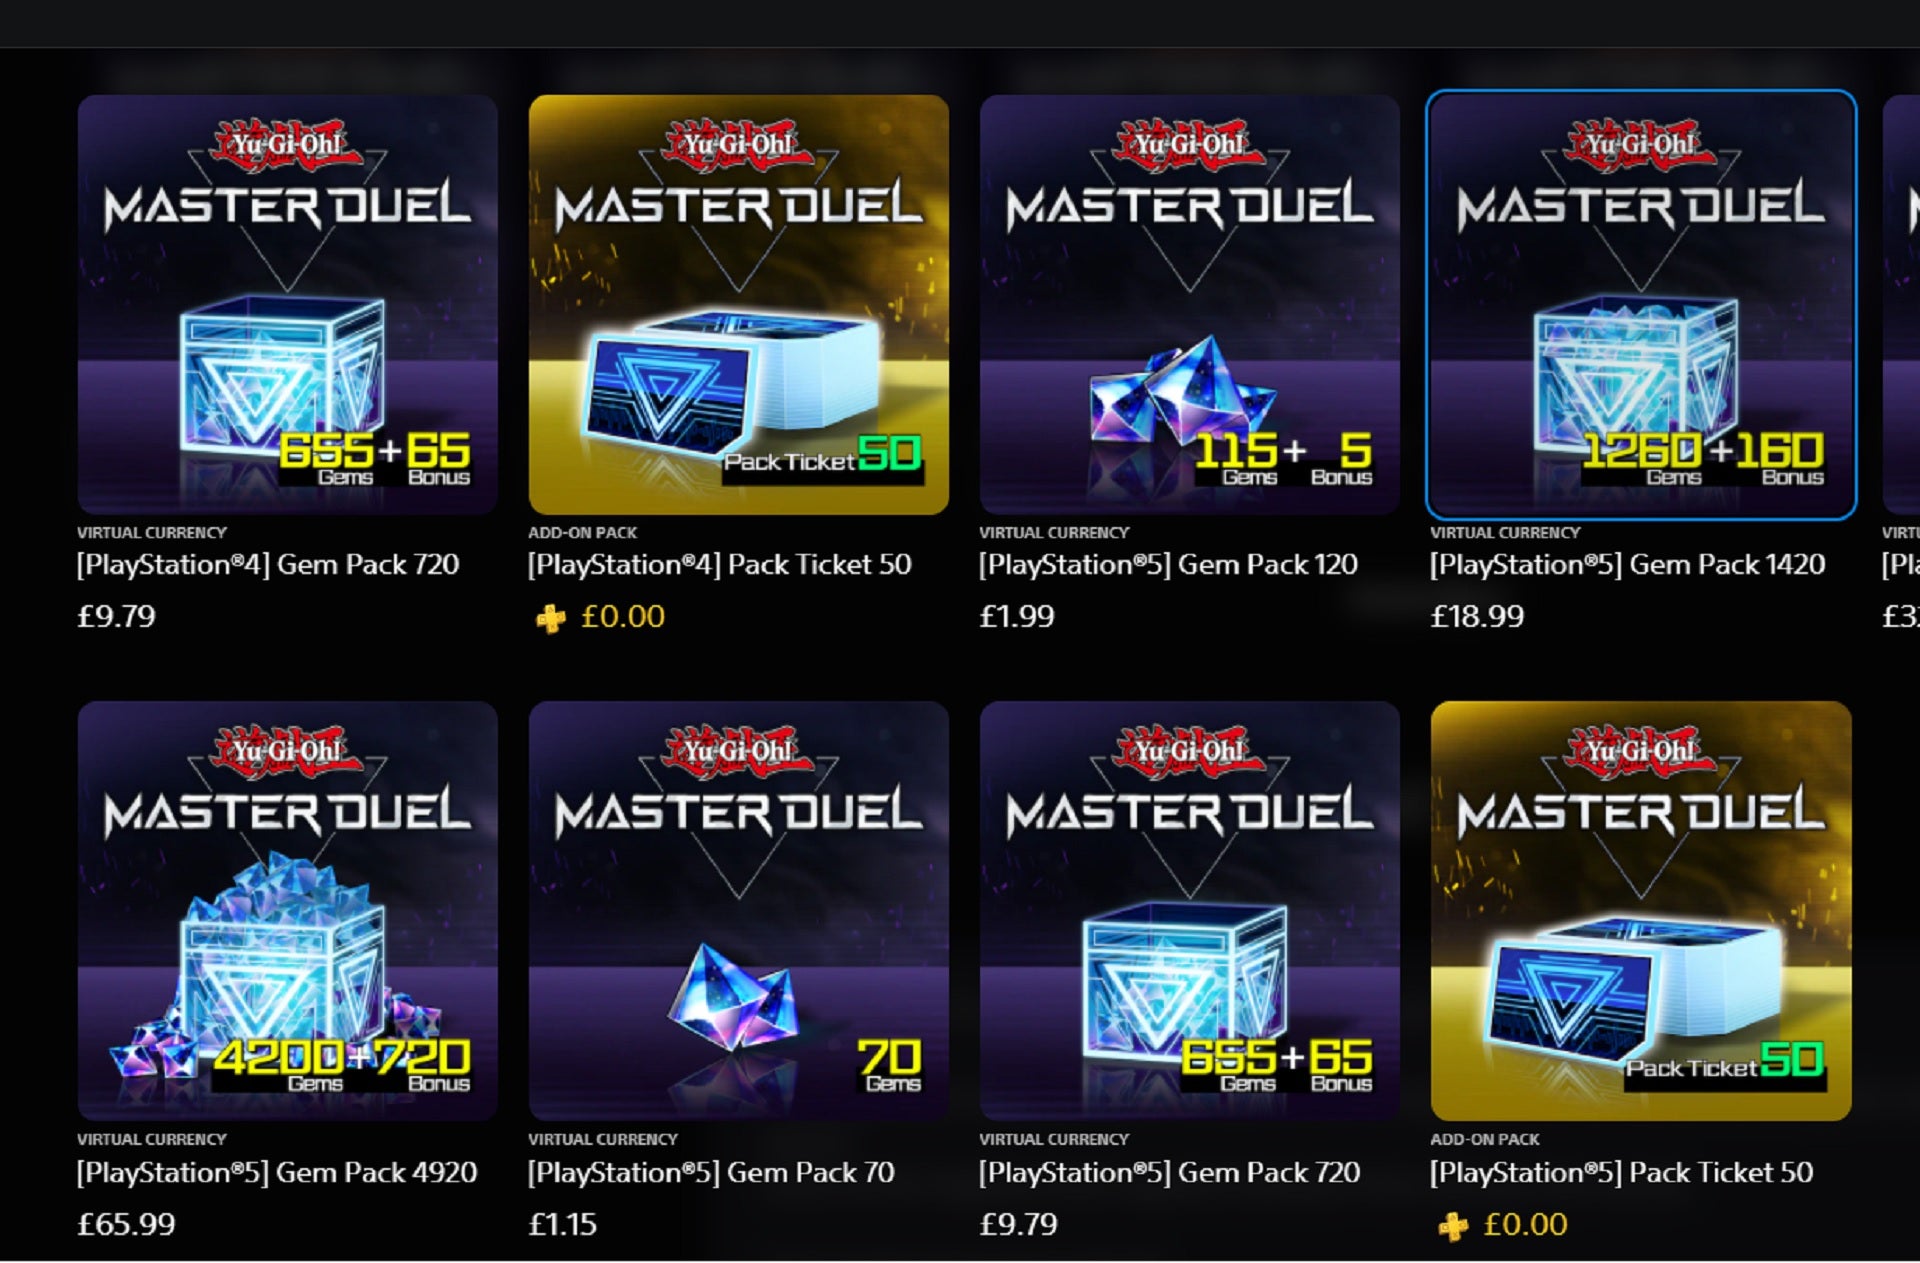 Image for PS Plus owners can get 50 free YuGiOh Master Duel card packs right now